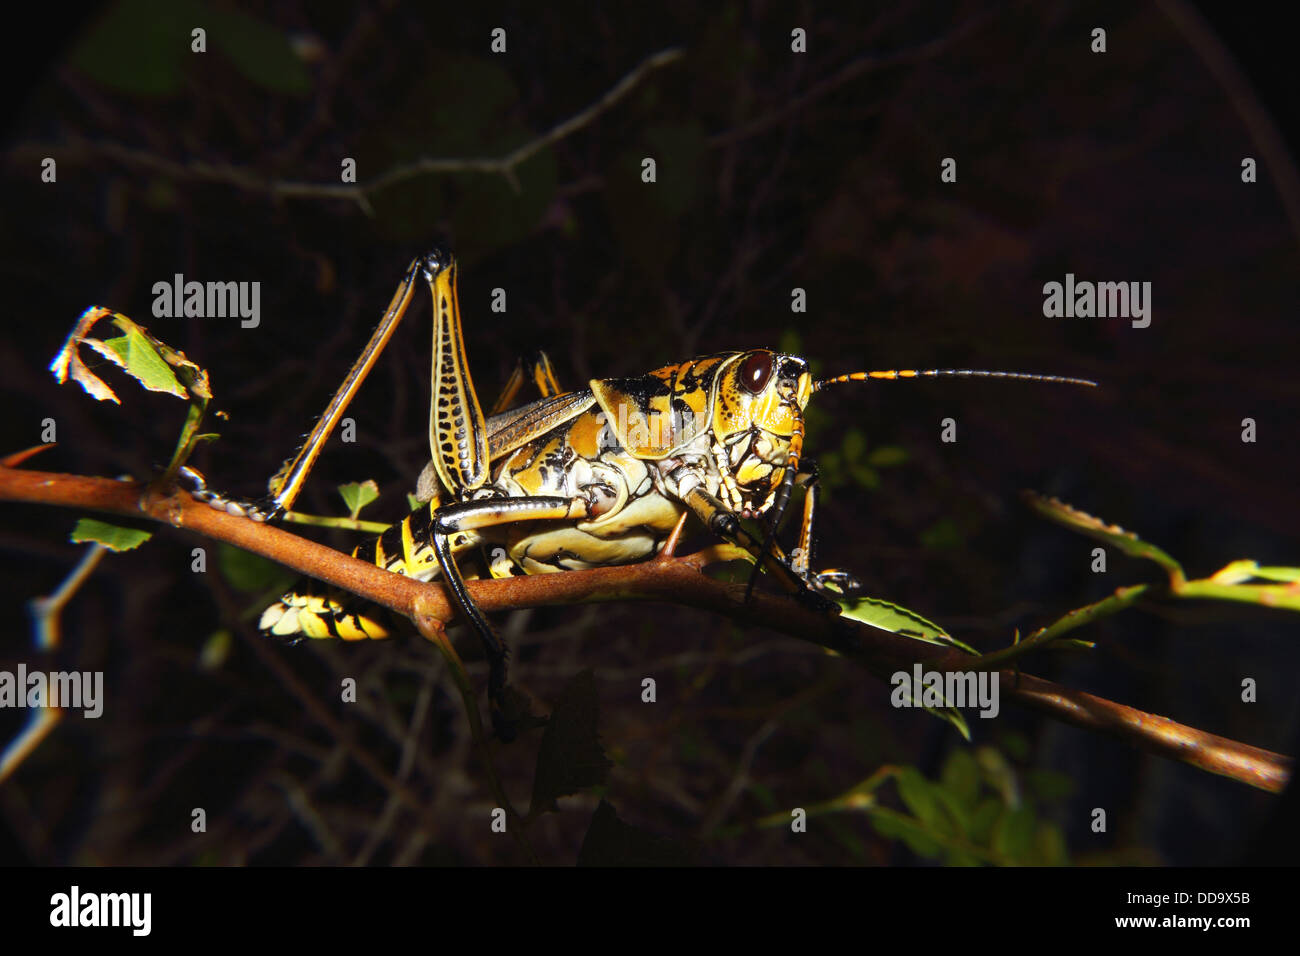 A side view of an Eastern Lubber Grasshopper Stock Photo